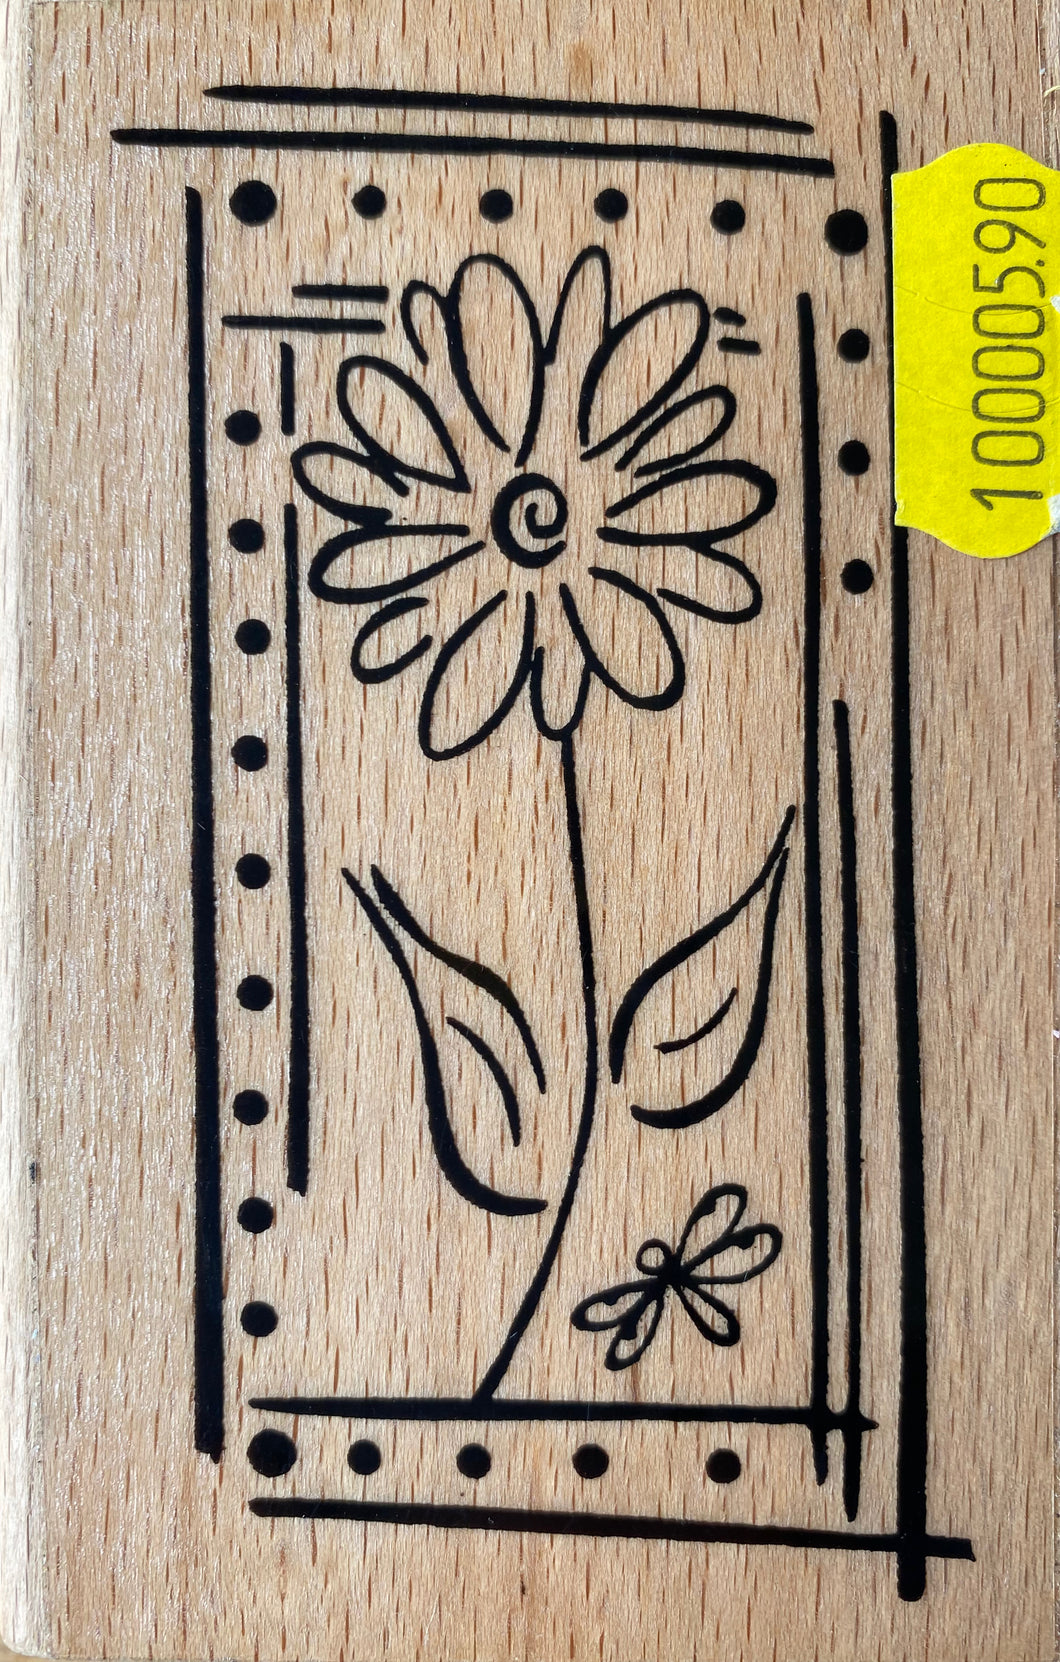 Creative Expressions Wood Mounted Grey Rubber Stamp - Daisy